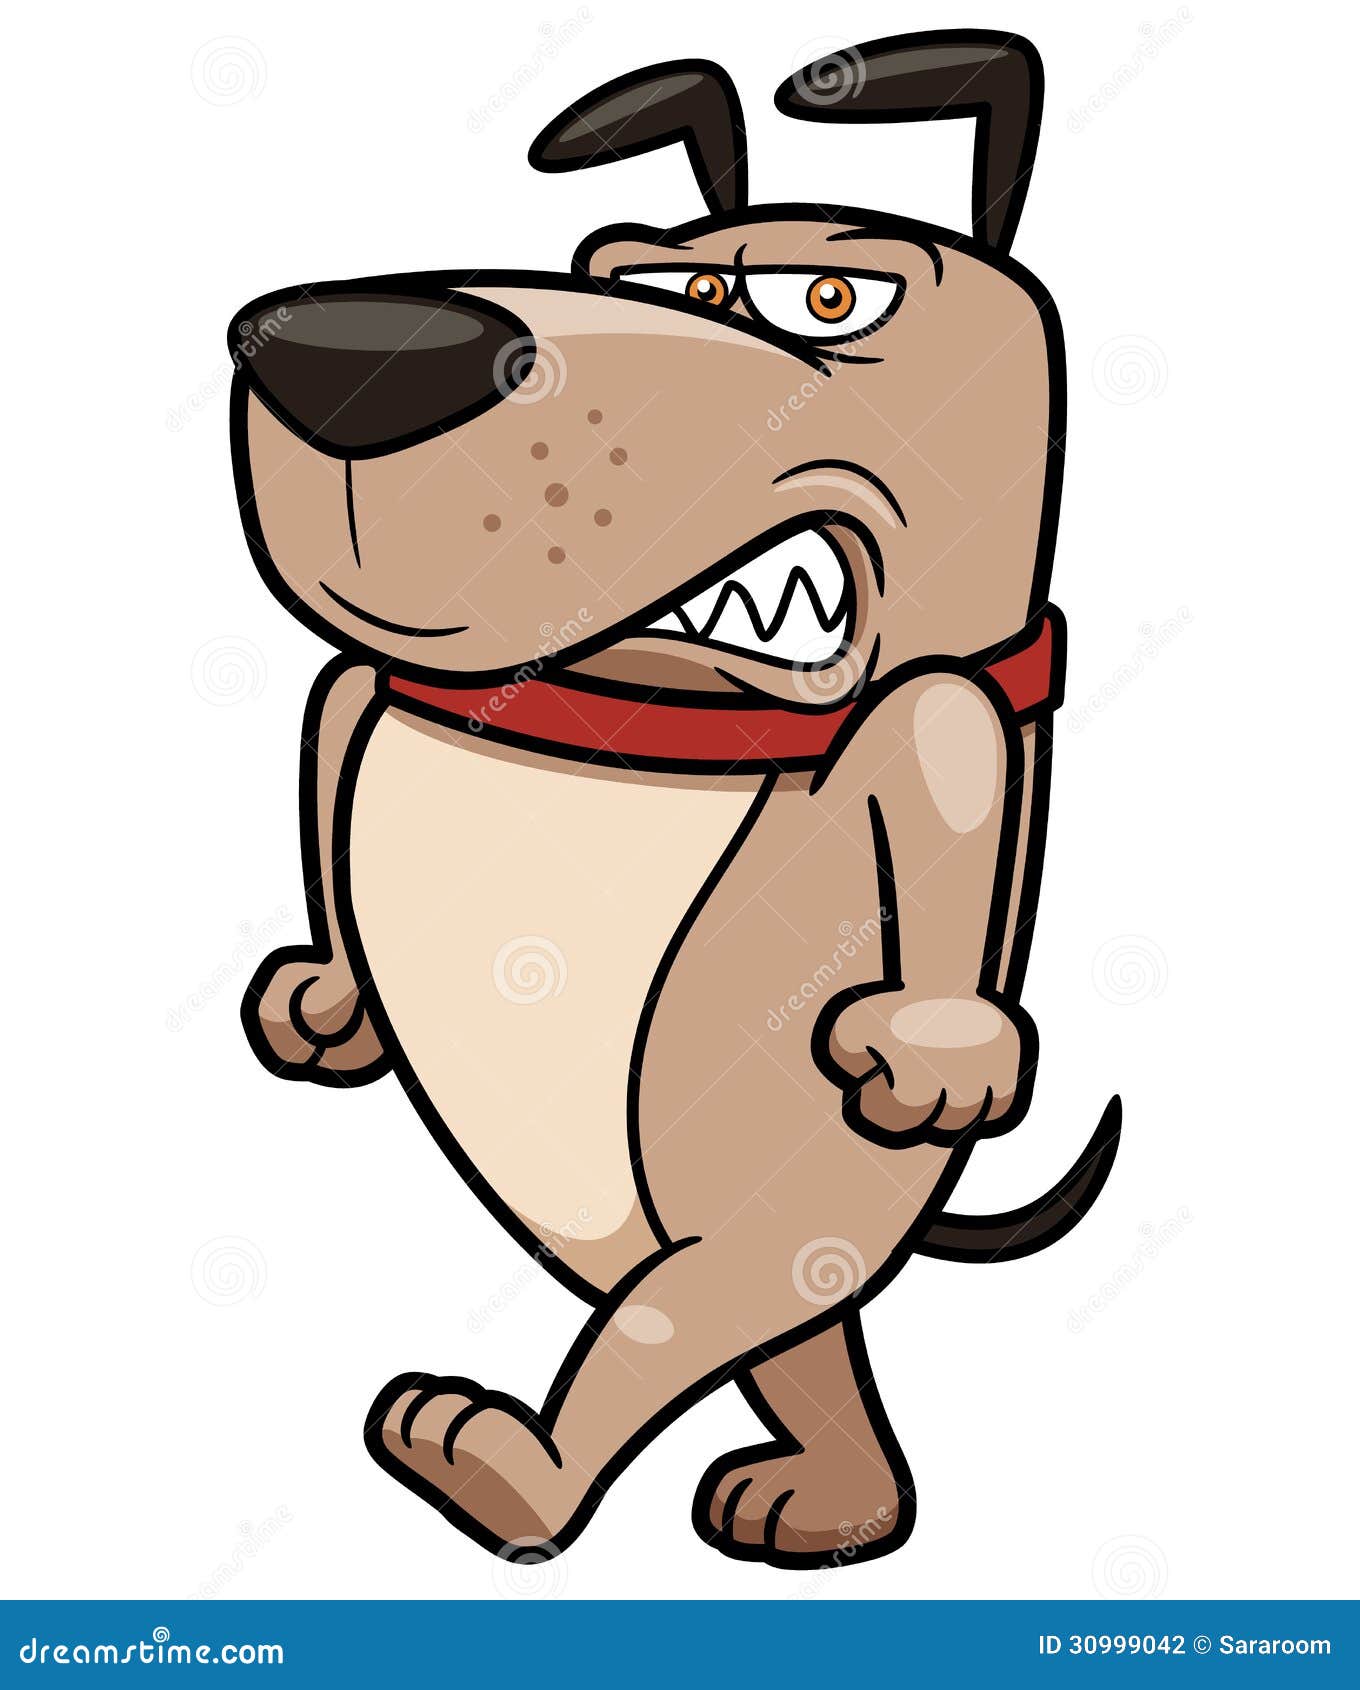 angry dog clipart - photo #36